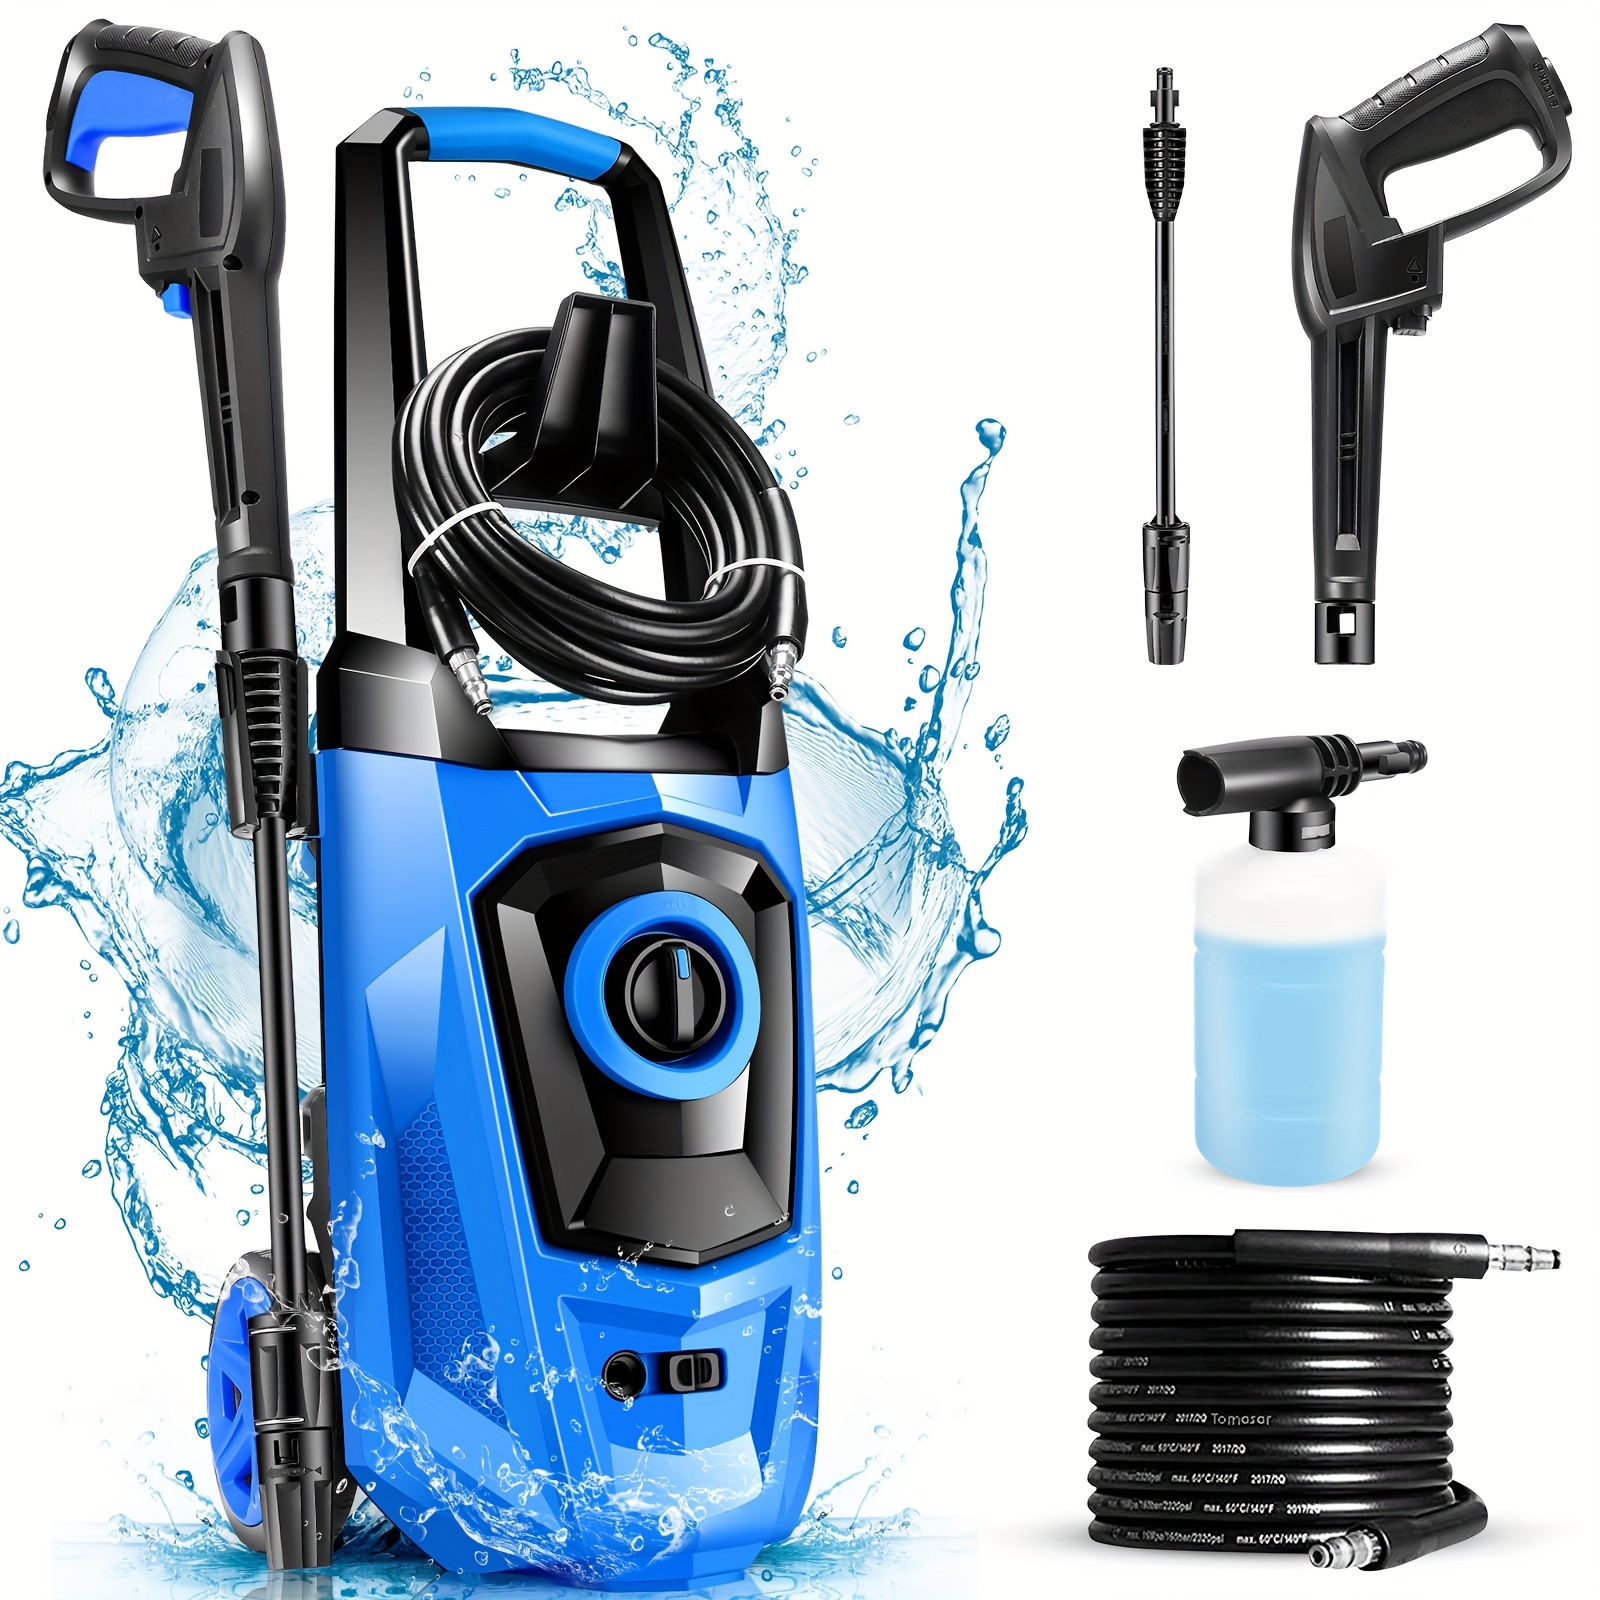 

1800w Pressure Washer, Portable Power Washer Electric Powered With Adjustable Nozzle And Foam Cannon, 1.9gpm Electric Power Washer, For Home Car Garden Yard